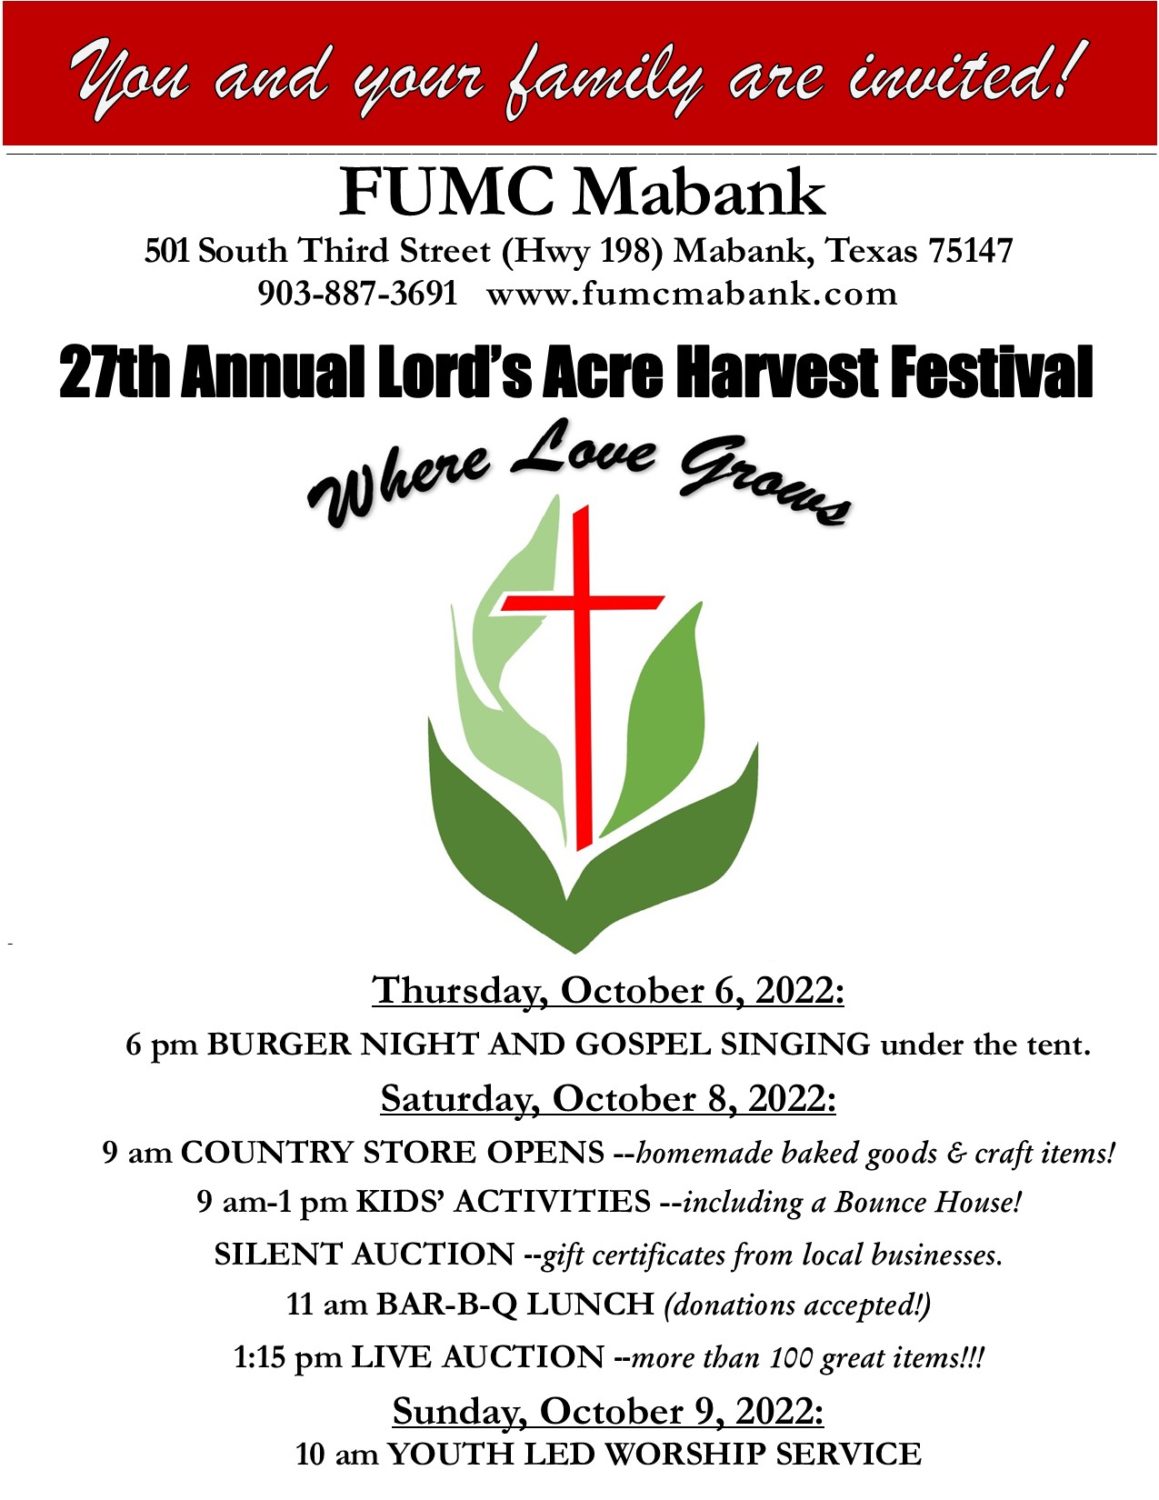 27th Annual Lord's Acre Harvest Festival 2 lords acres CedarCreekLake.Online